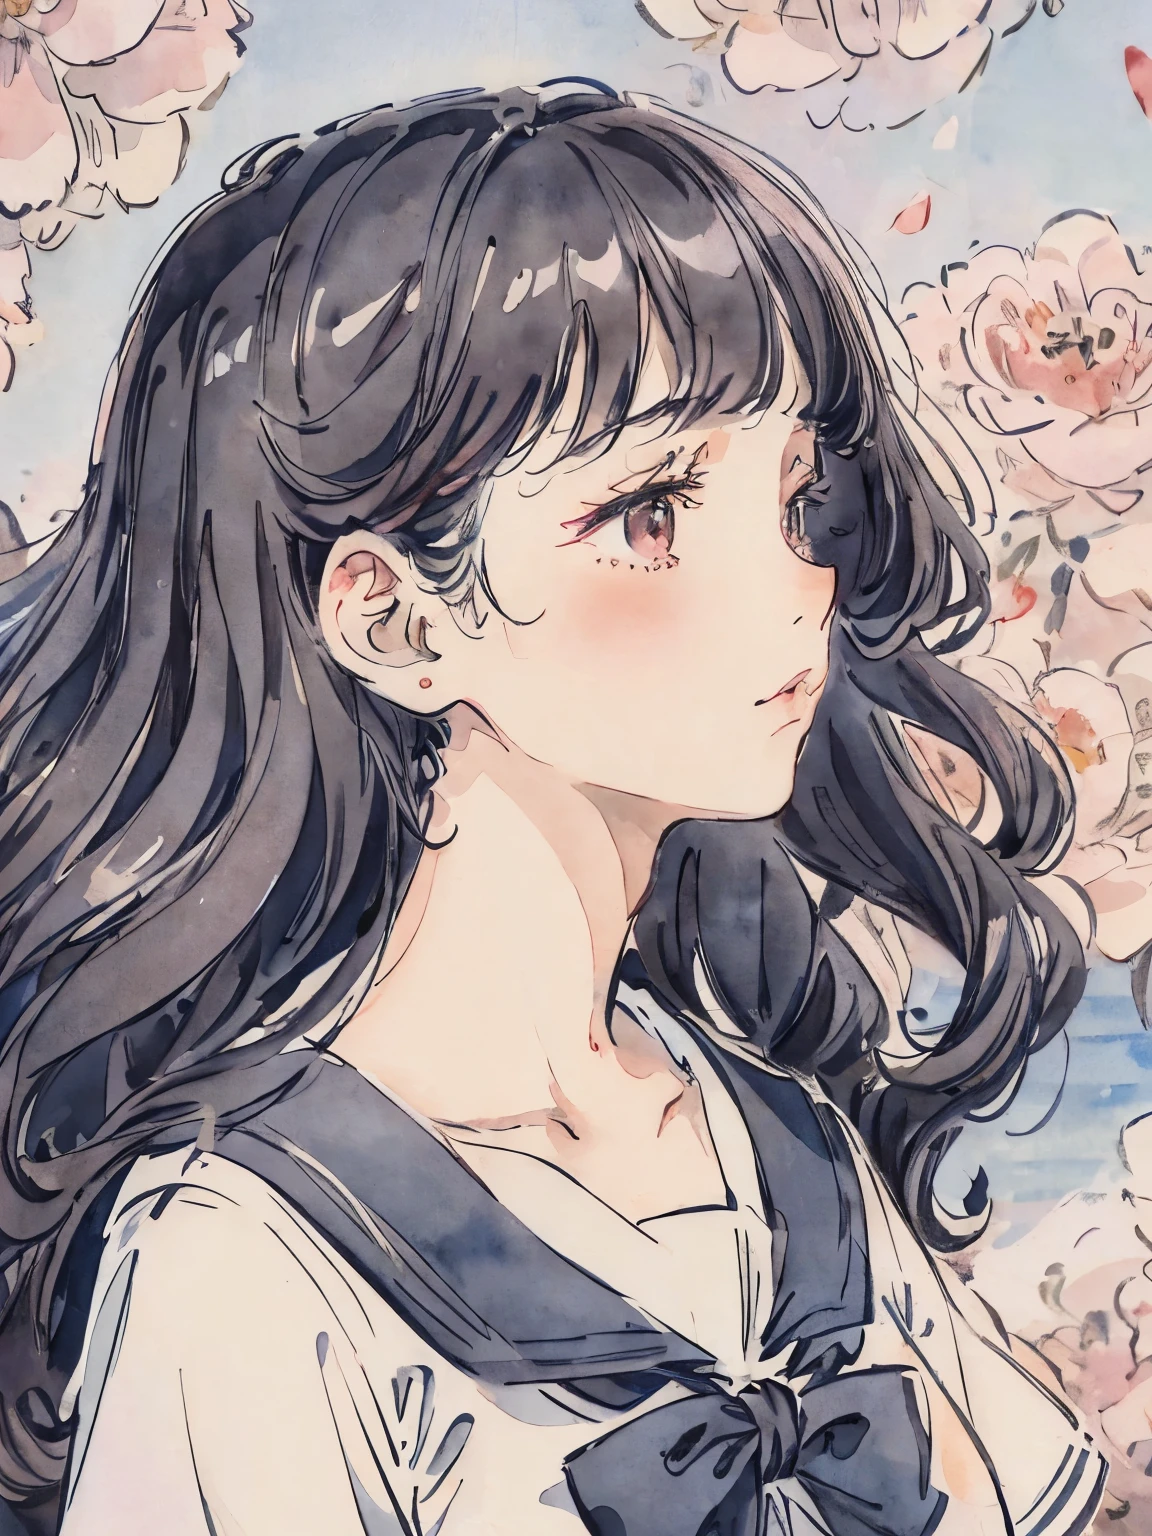 sailor suit、curl hair、long black hair、sailor suit、profile、Lady、flower garden、icon、soft lighting、close up of face、photo studio、hair blowing in the wind、petal、curly hair、watercolor style、Lots of flowers in the background、profile、Red camellia flowers all over the background、